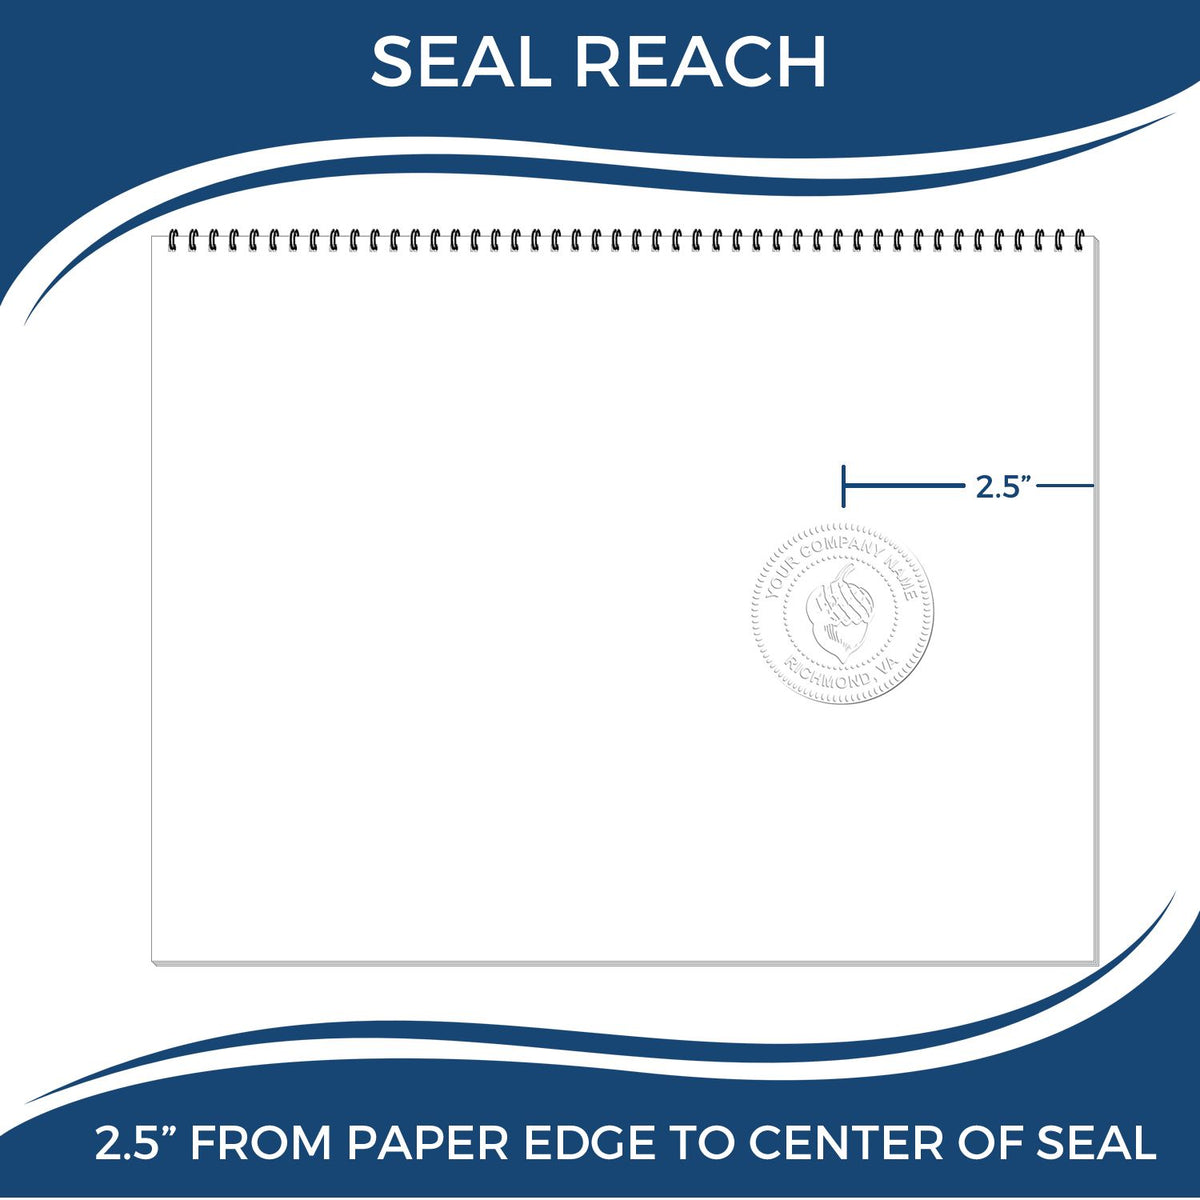 An infographic showing the seal reach which is represented by a ruler and a miniature seal image of the Long Reach Nevada Geology Seal